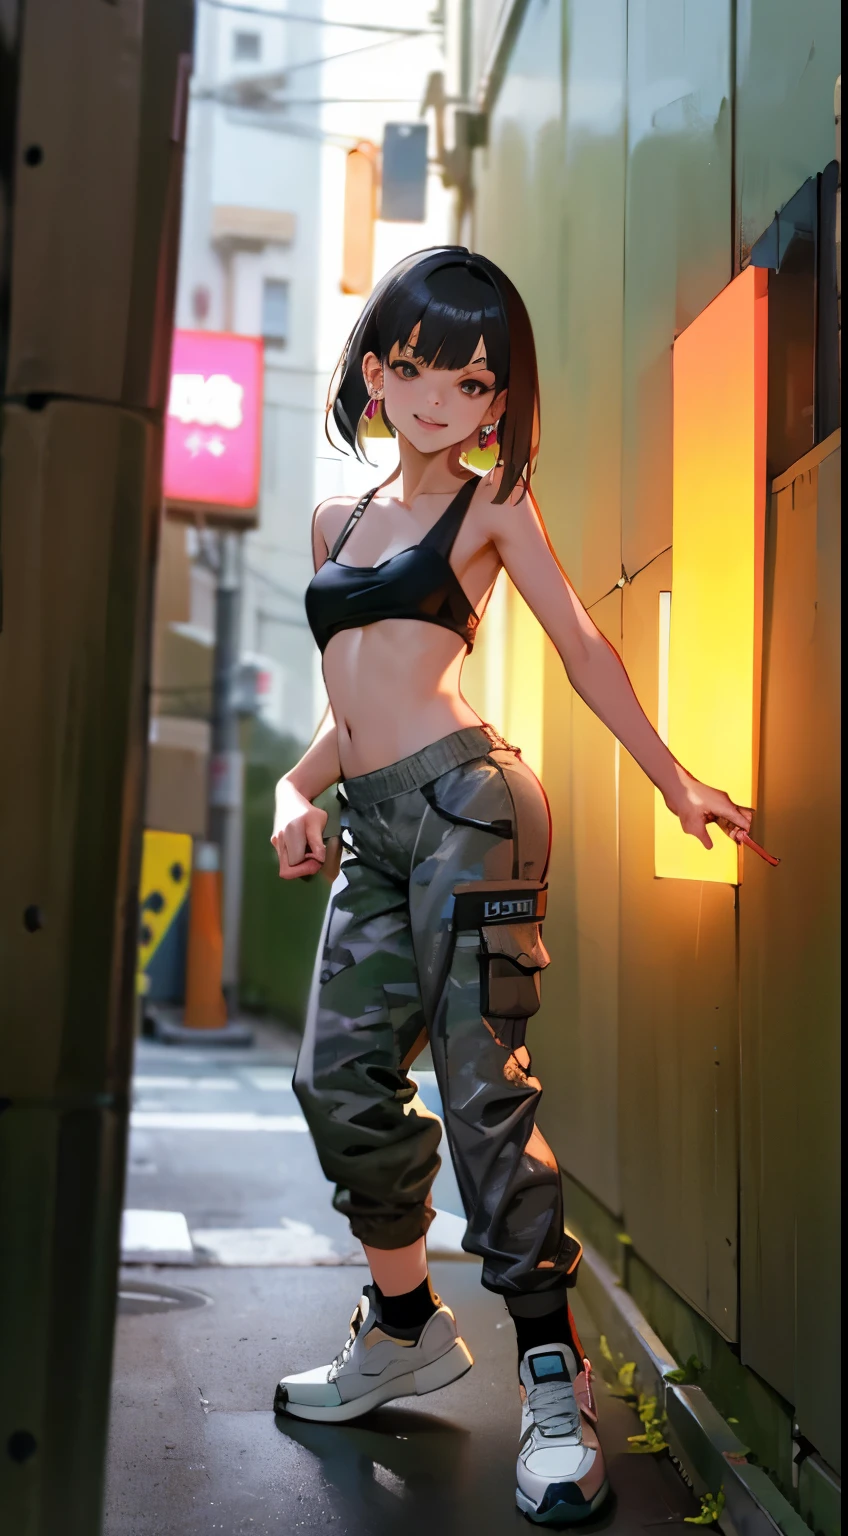 (best quality,4k,highres,masterpiece:1.2),realistic,Japanese style masterpiece: environment: night, streets, alleyways and graffiti on the walls, neon lights, young woman, in her 20s, black hair, brown eyes, dangling earrings, silver short hair, perfect figure, slim hips, exposed small breasts with brown nipples, pierced navel, loose camouflage pants open to reveal black underwear, white sneakers, mischievous smile, light makeup, hip-hop pose, accompanied by a stray black cat.